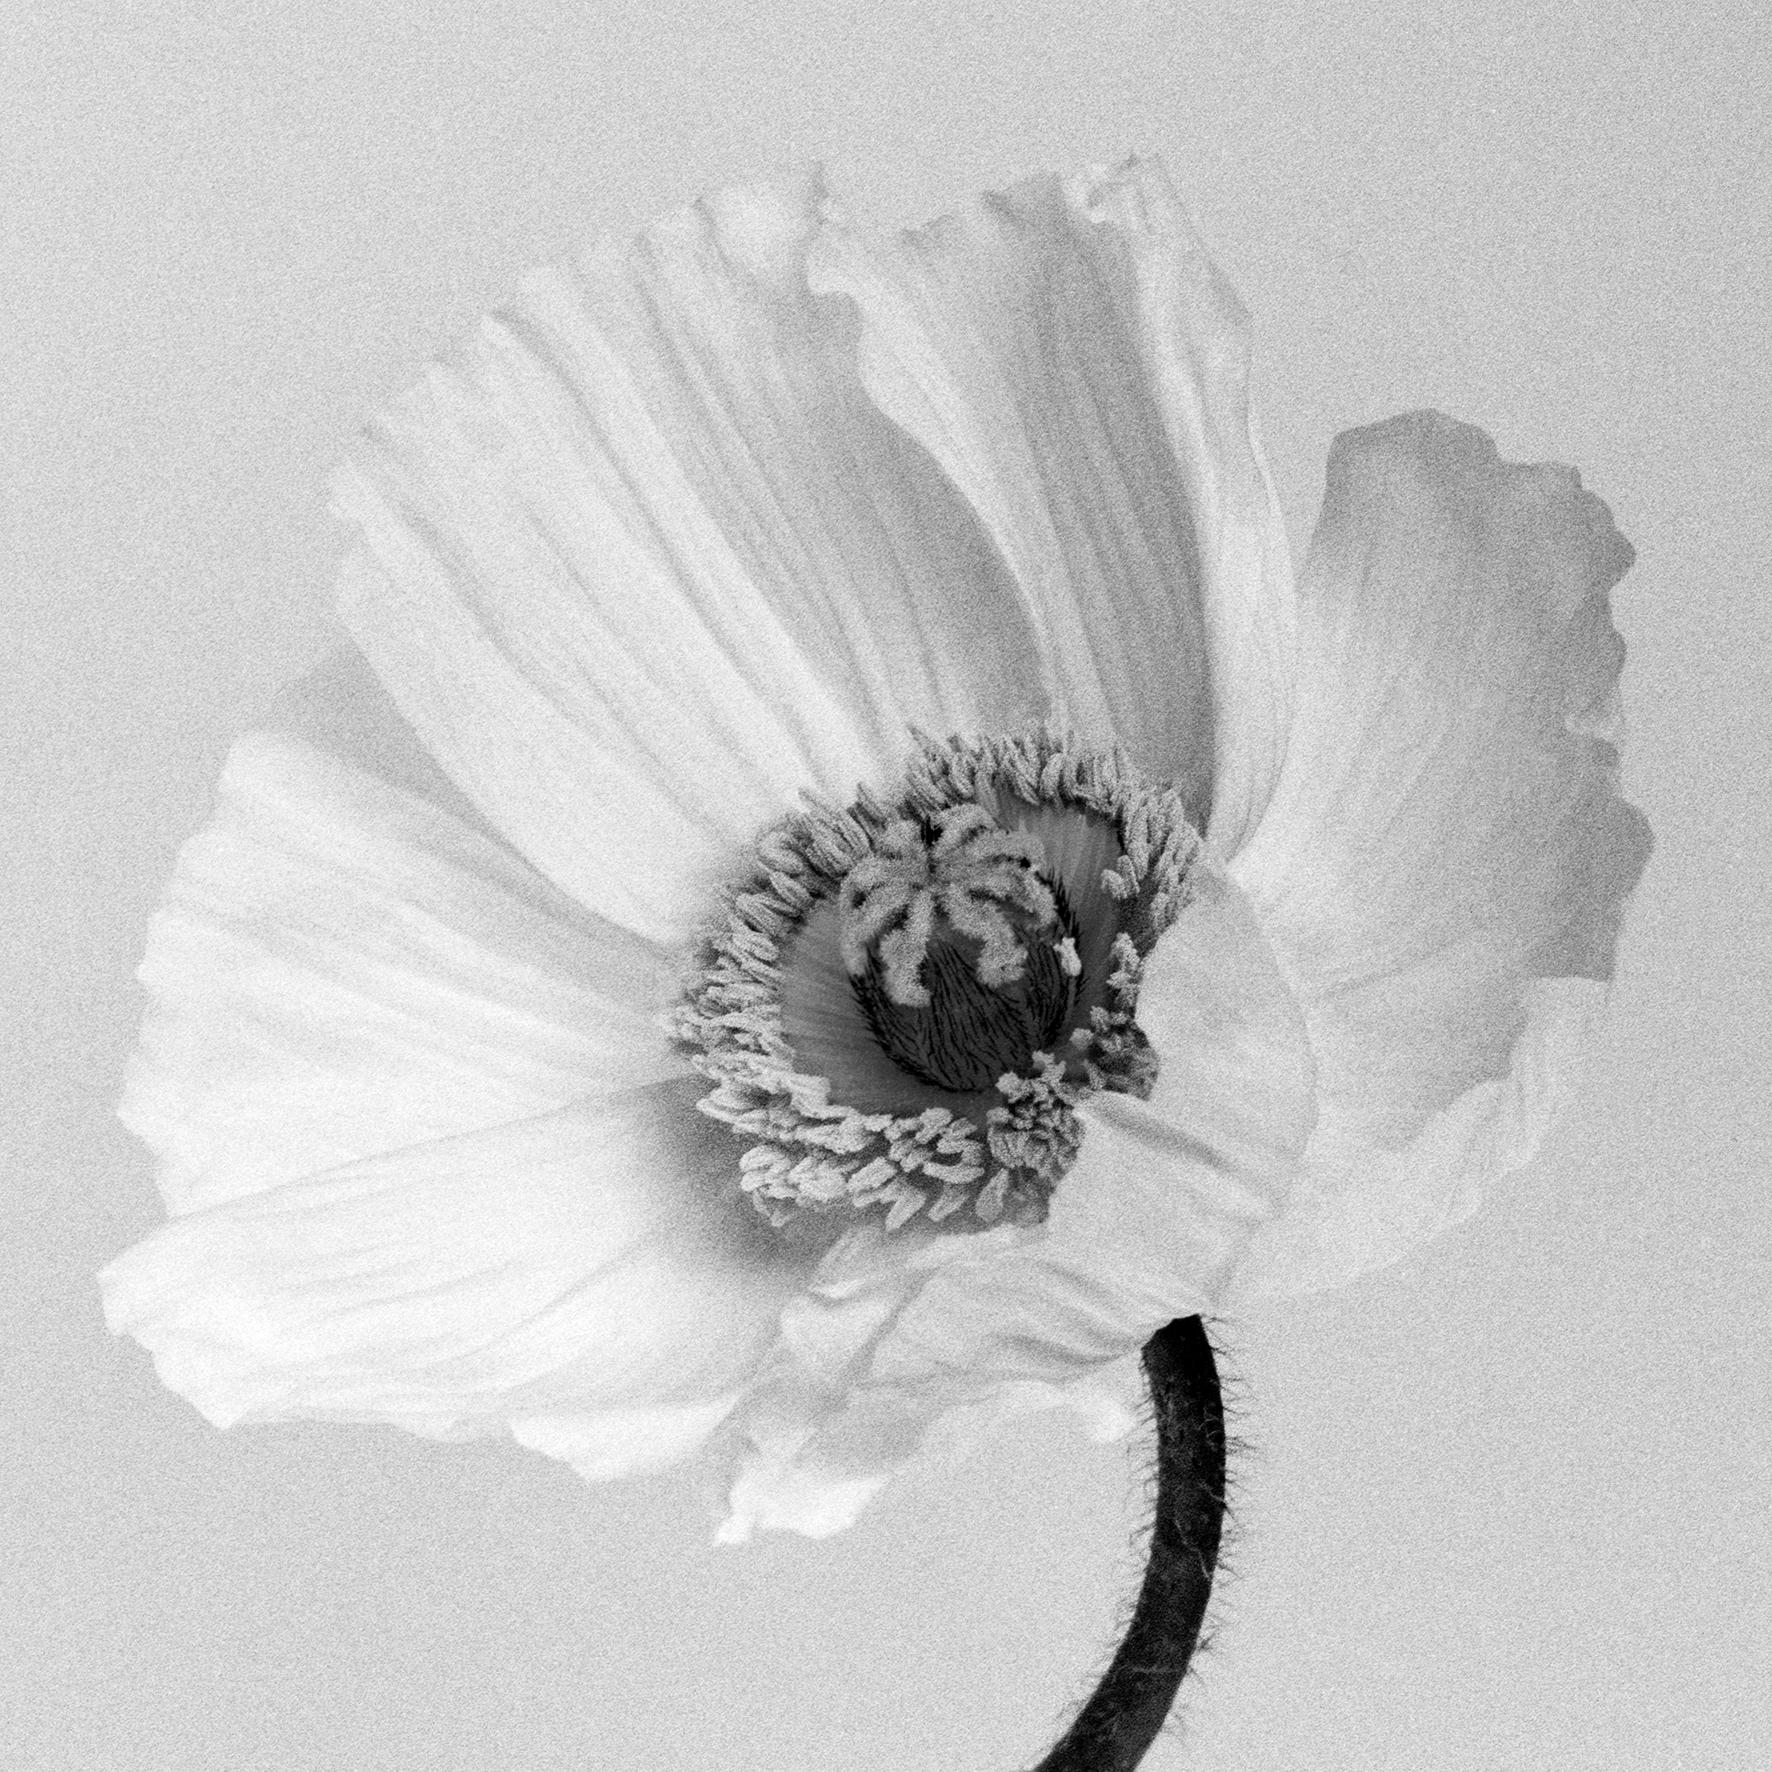 Ugne Pouwell Black and White Photograph - Poppy no.2 - Analogue Black and White Floral Photography, Limited edition of 15